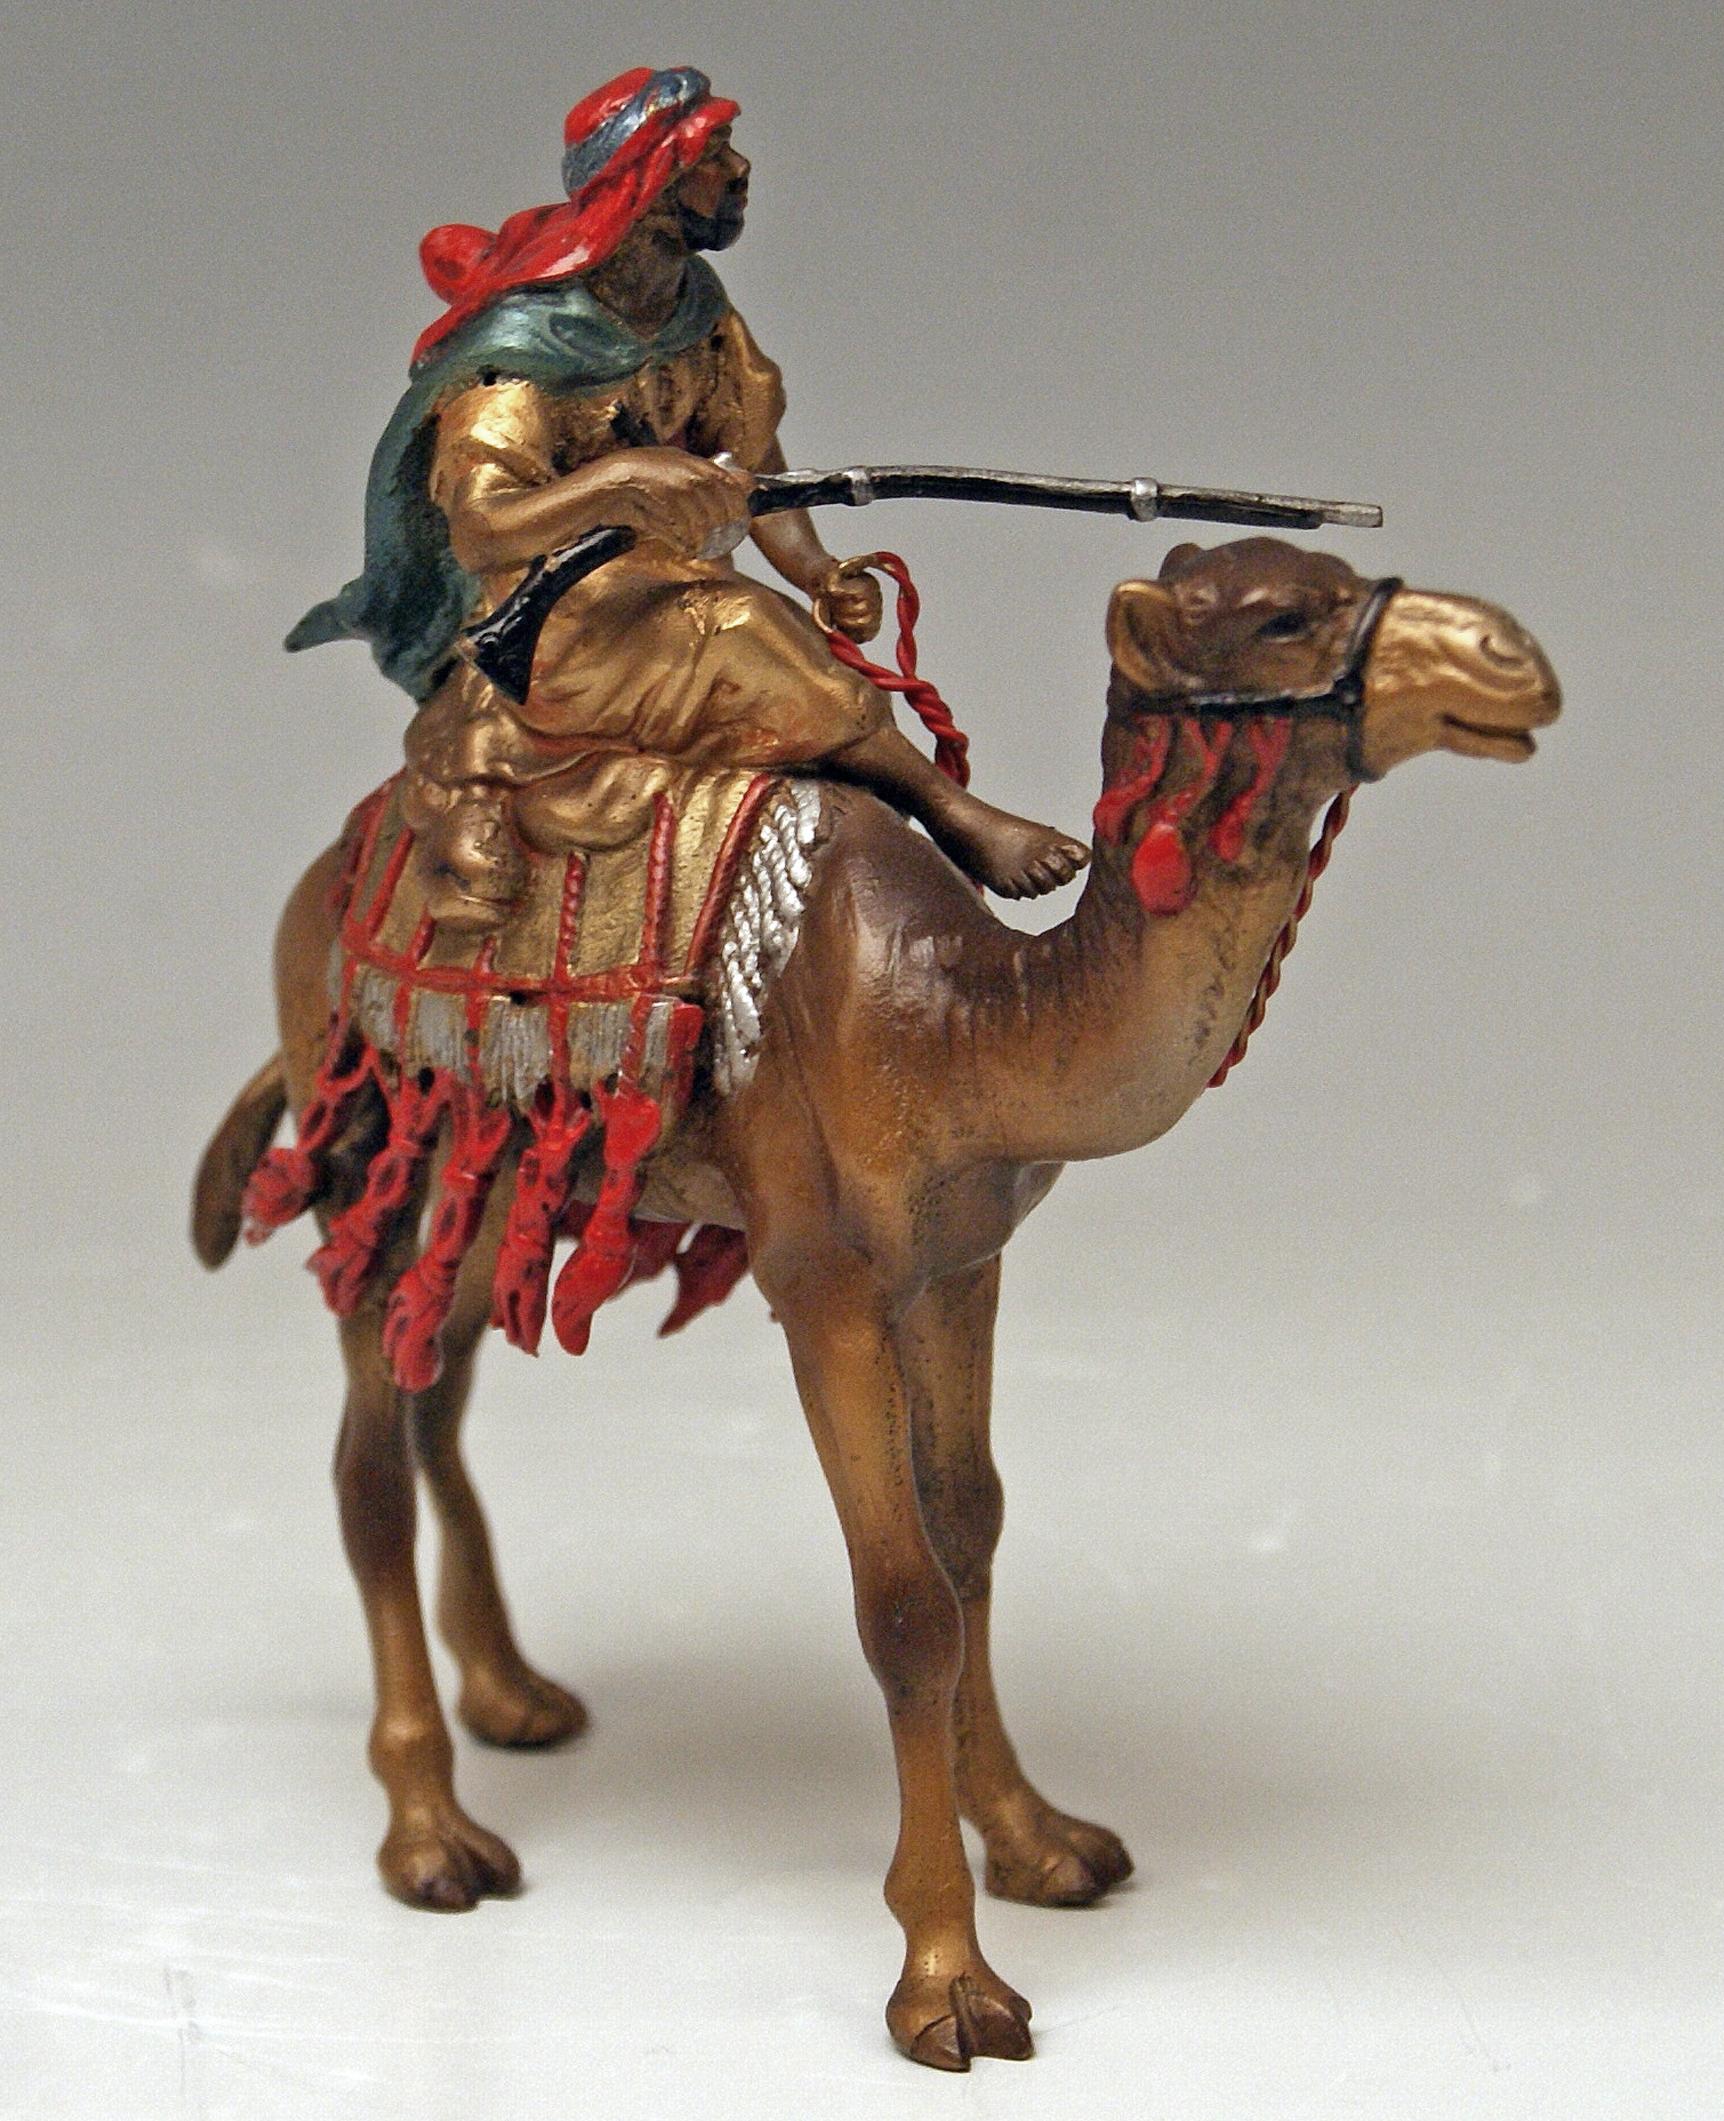 Stunning bronze figurine: Arab Man Riding on Camel

This finest bronze figurine manufactured by Franz Bergman is manufactured with greatest care; Arab Man Rides On A Camel / this bronze item is of stunning liveliness / the details are amazingly